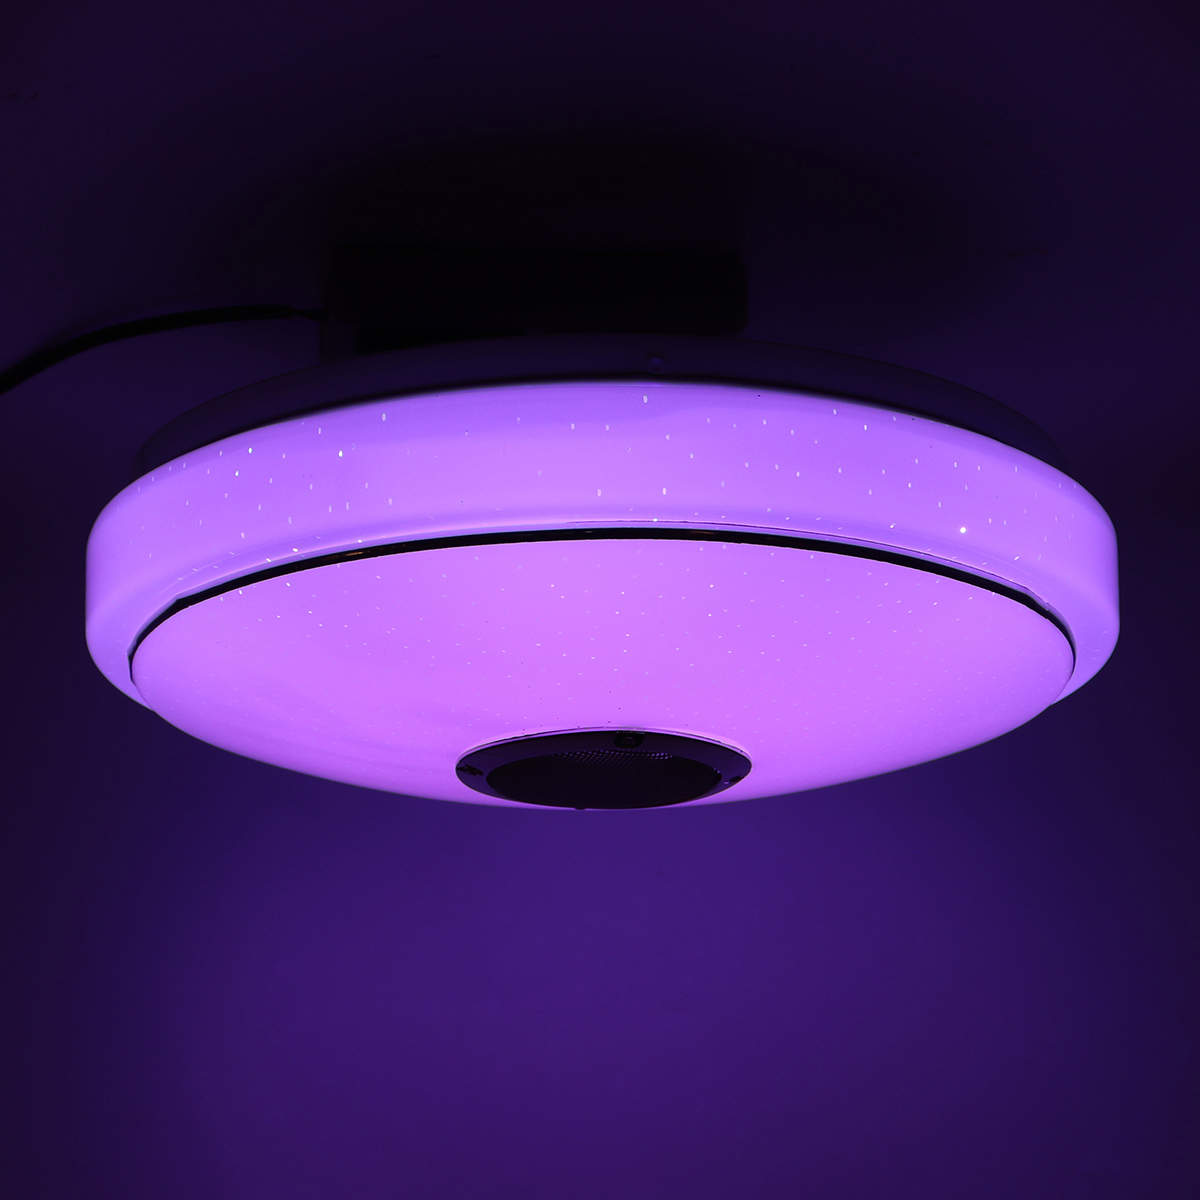 Dimmable-RGBW-LED-Music-Ceiling-Lights-with-bluetooth-Speaker-Cellphone-APP-Control-Color-Changing-L-1742404-10